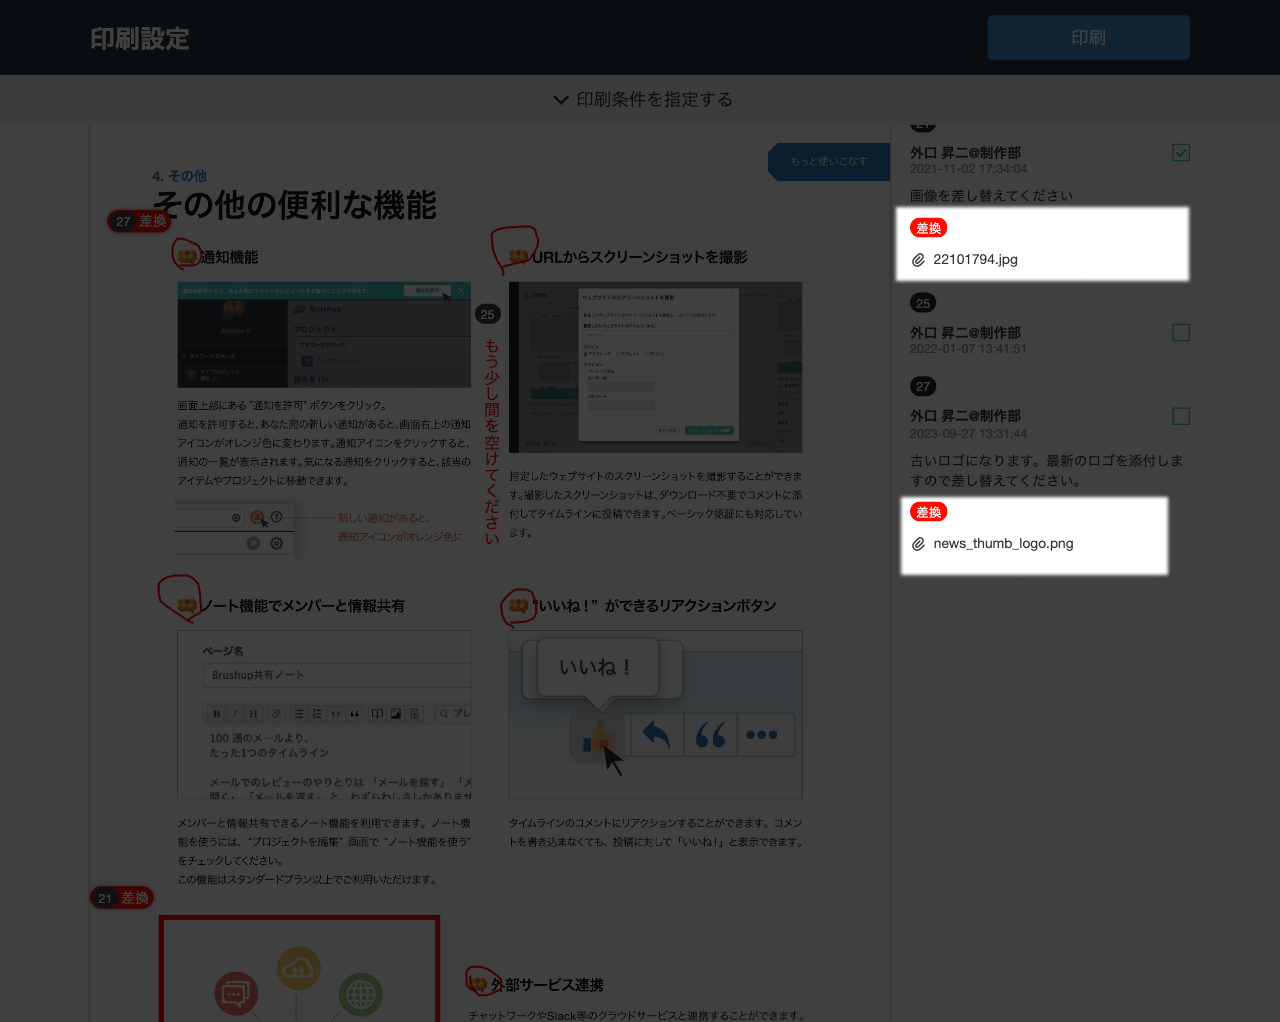 support.stg05.brushup.fdev2.net_contents_print_review_13819_cmt_0(デバイス)(1).png